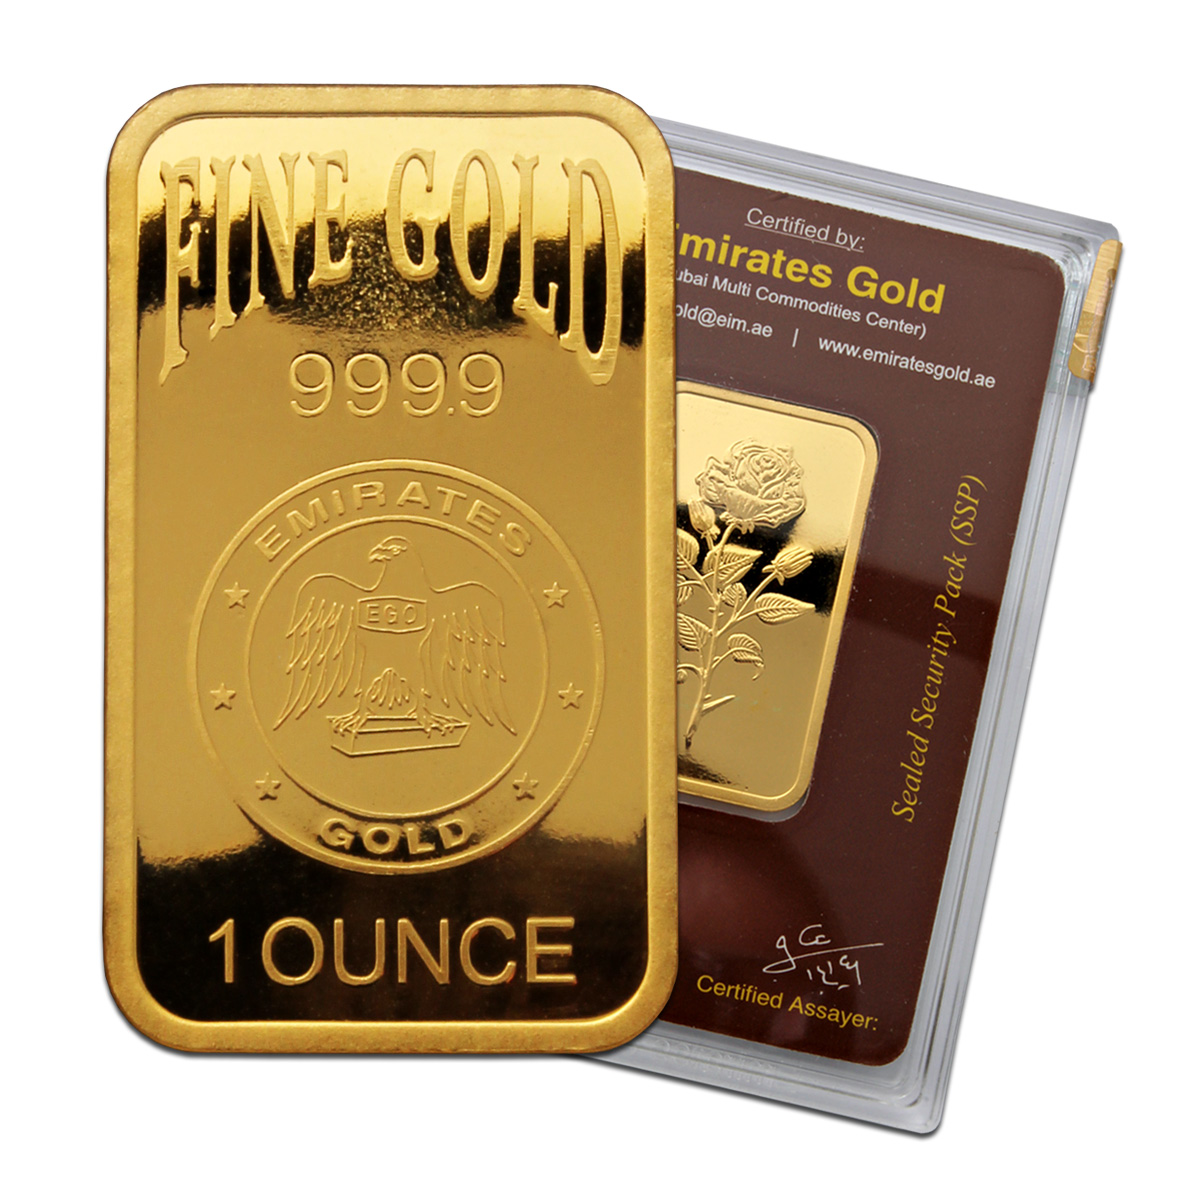 Emirates Gold 1 Ounce Gold Bar Packaged 